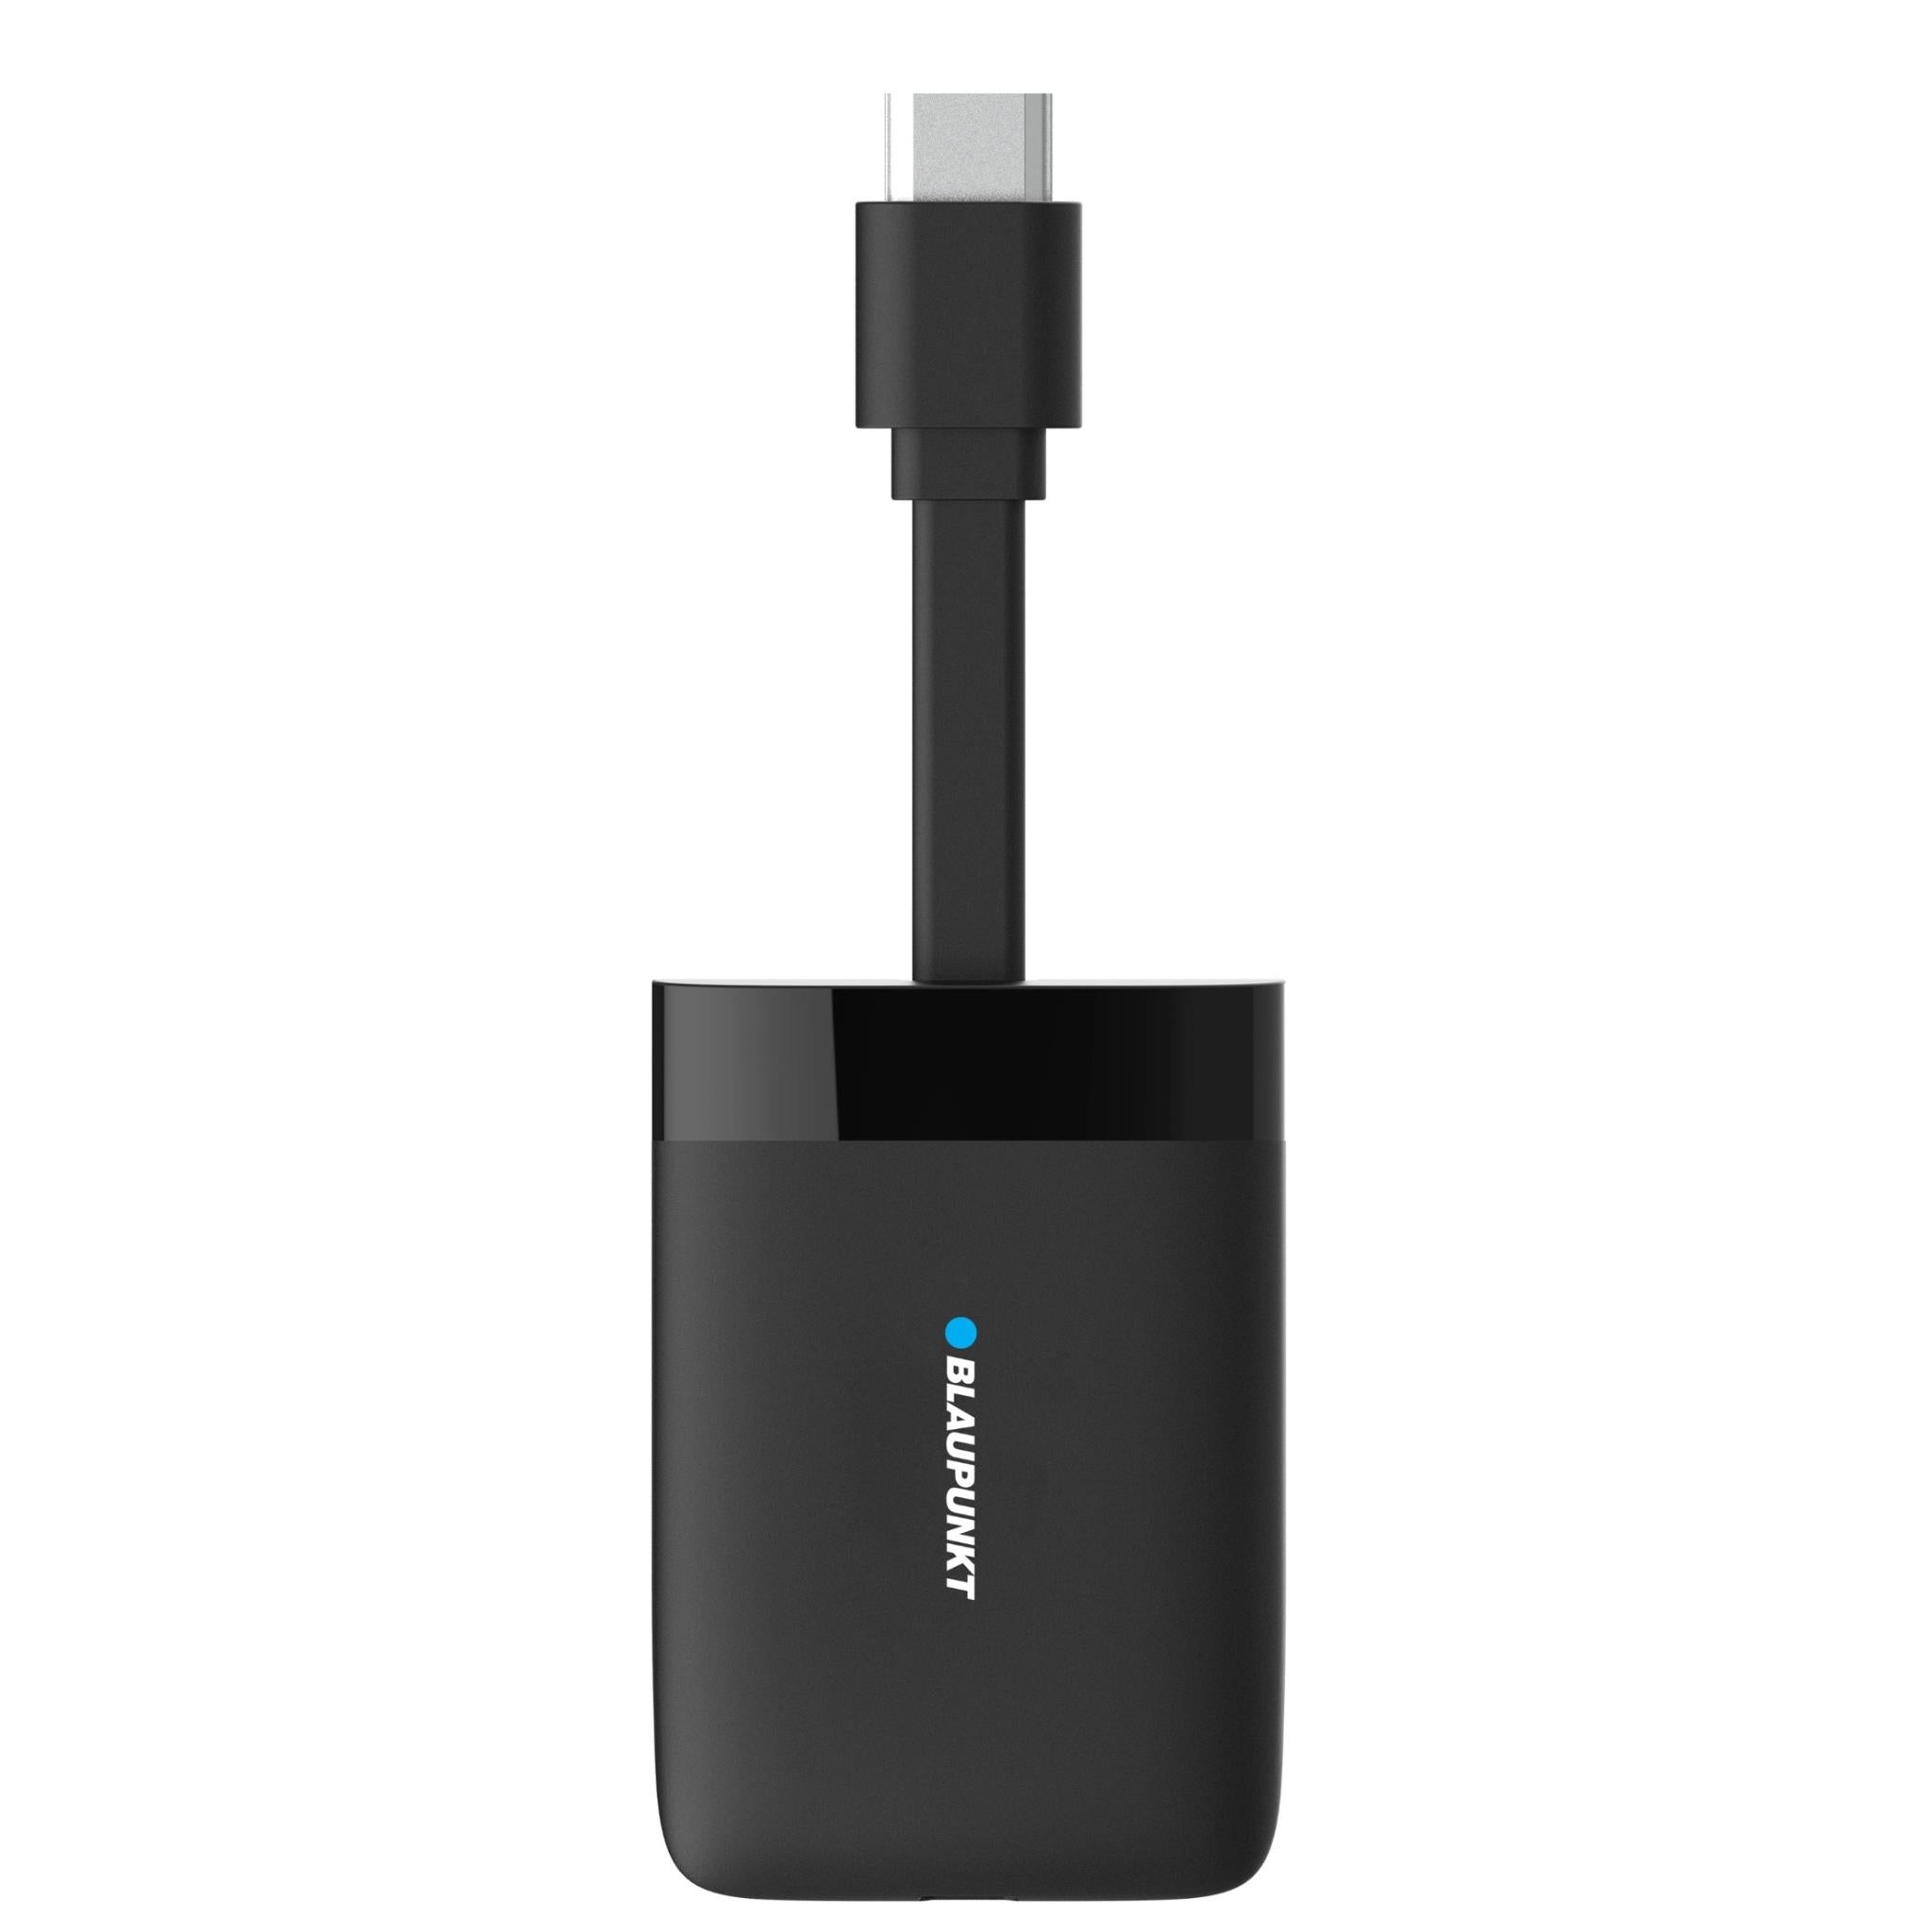 blaupunkt android tv device